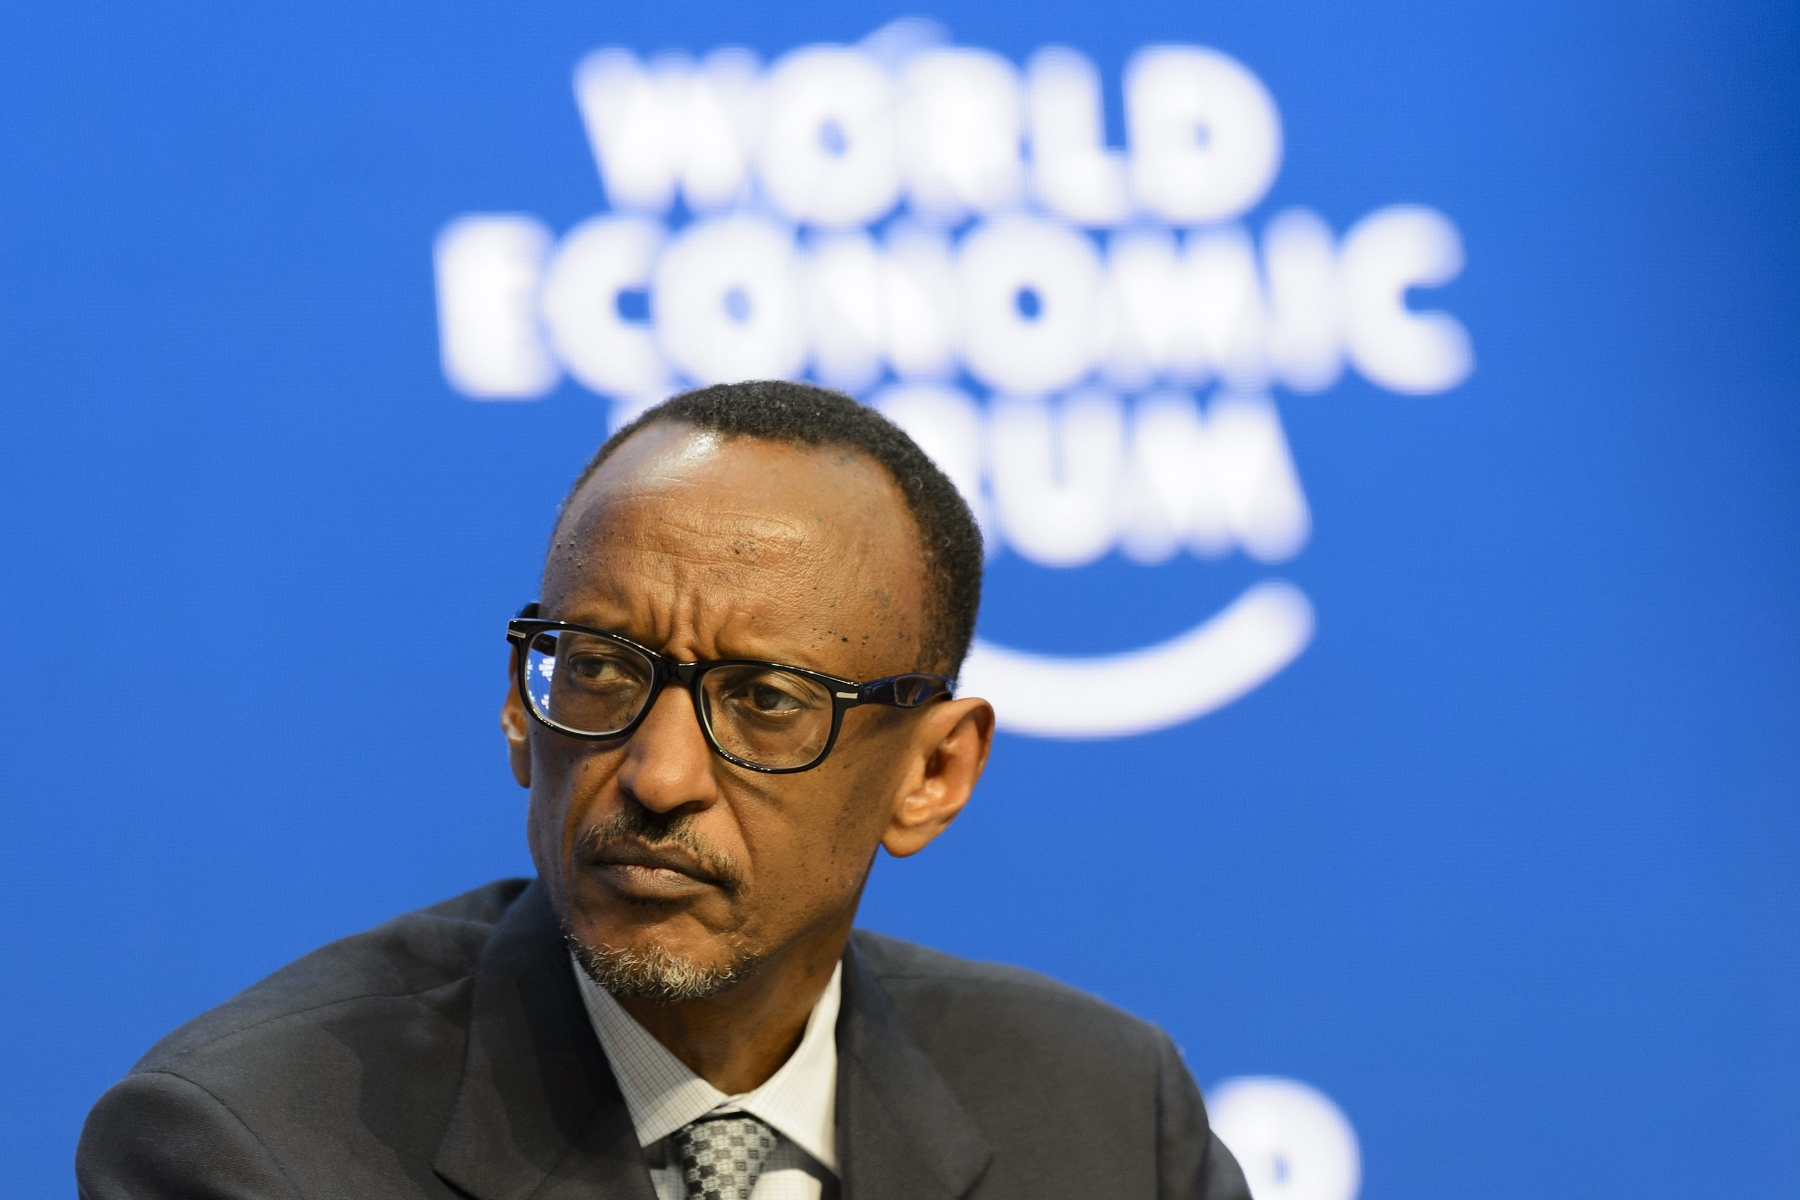 Paul Kagame President of Rwanda, reacts during a panel session at the 45th Annual Meeting of the World Economic Forum, WEF, in Davos, Switzerland, Friday, January 23, 2015. The overarching theme of the Meeting, which takes place from 21 to 24 January, is "The New Global Context". (KEYSTONE/Jean-Christophe Bott)